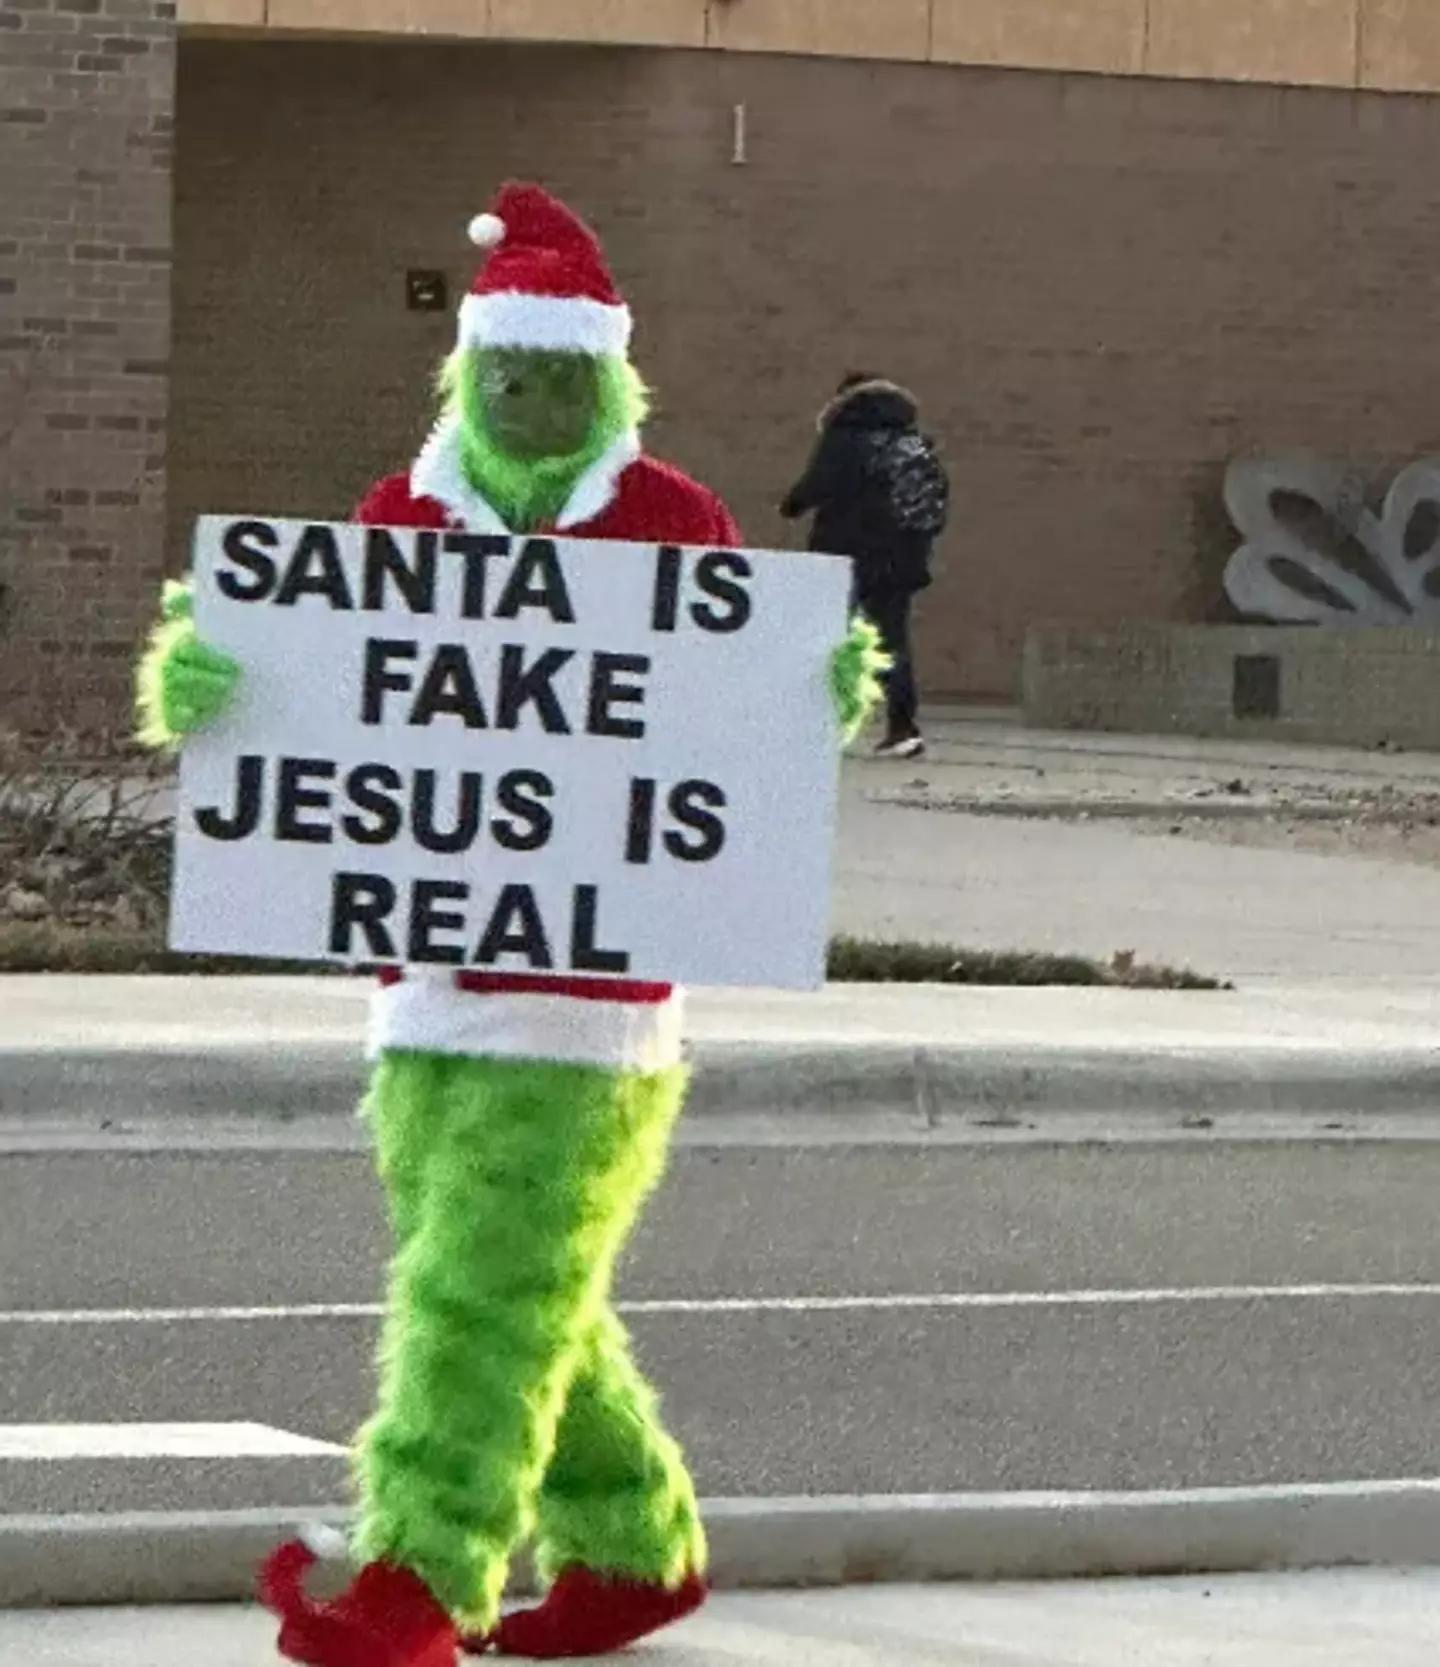 A pastor dressed up as the Grinch to deliver a shocking Christmas message.